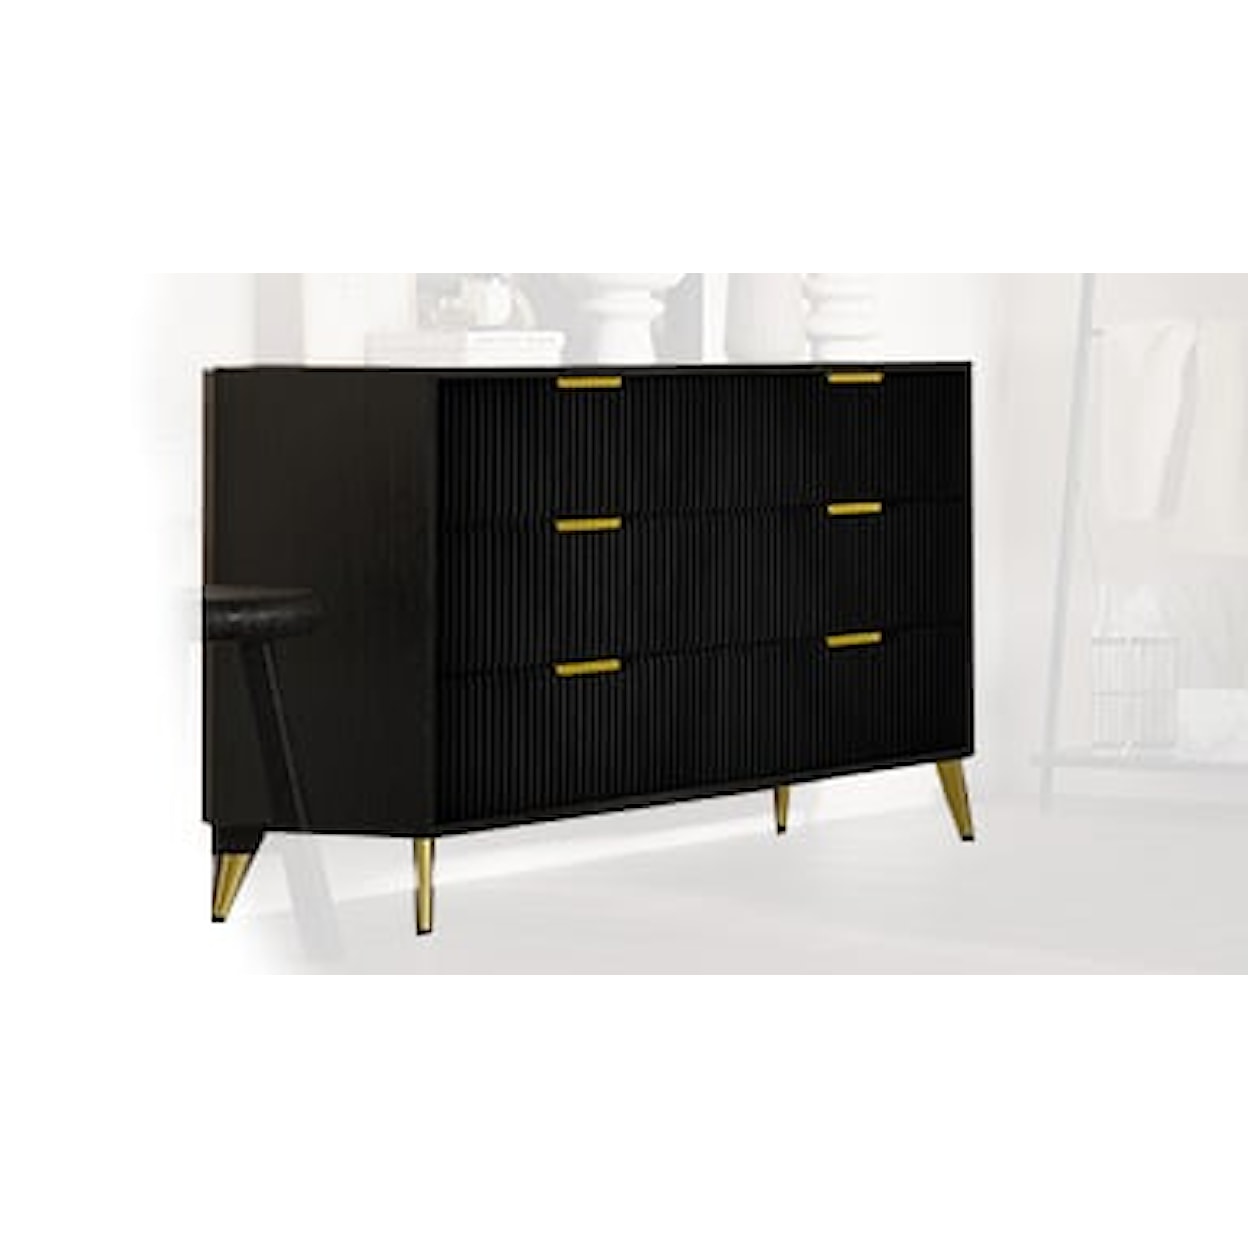 New Classic Kailani Dresser with 6 Drawers